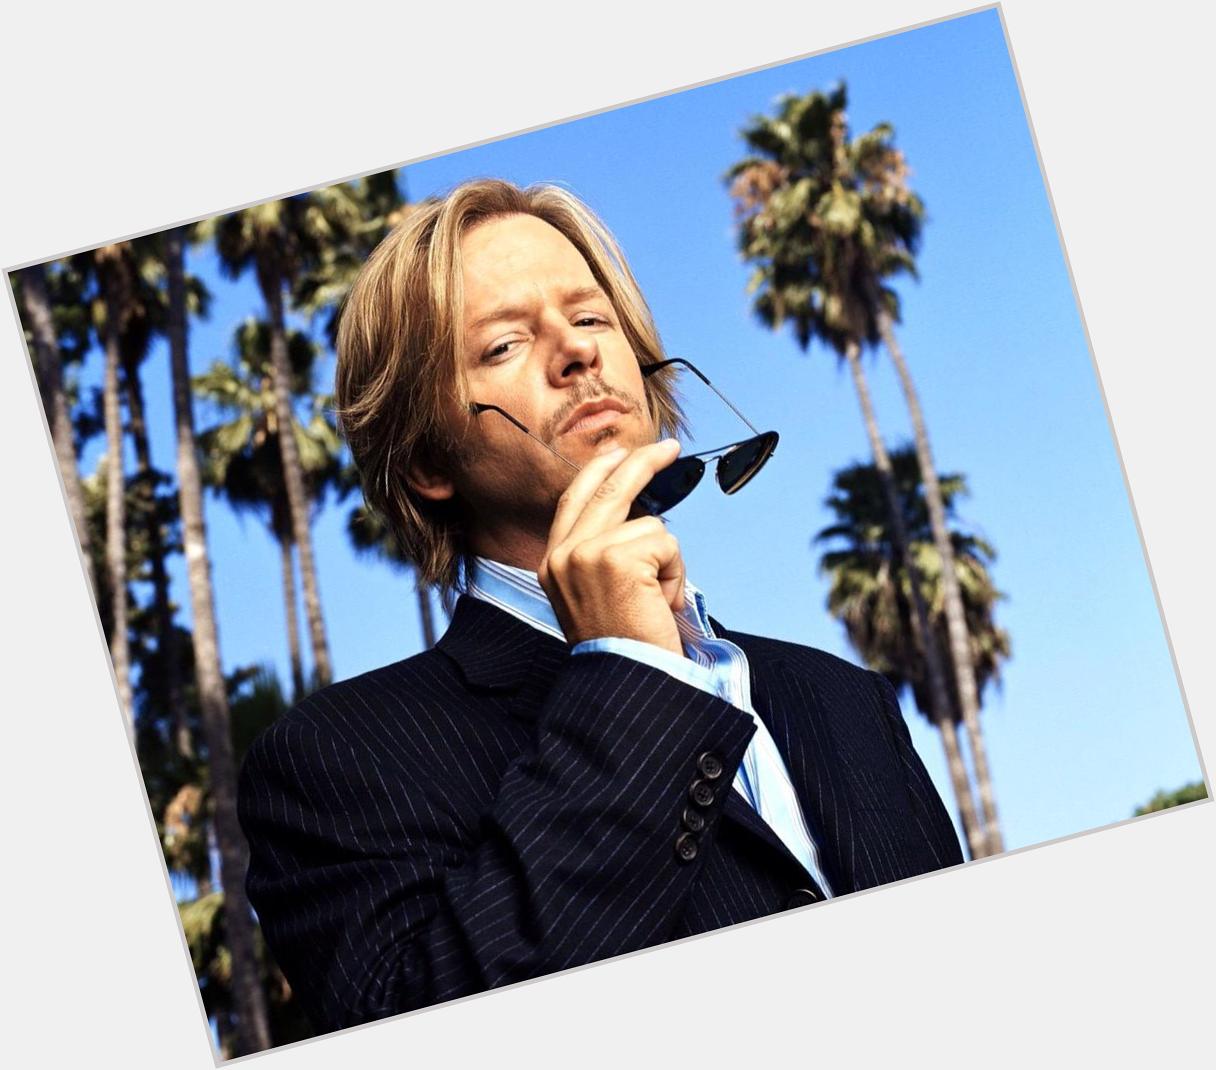 Technically is a sci/fi movie, it had time travel after all. So happy 51 birthday David Spade. 